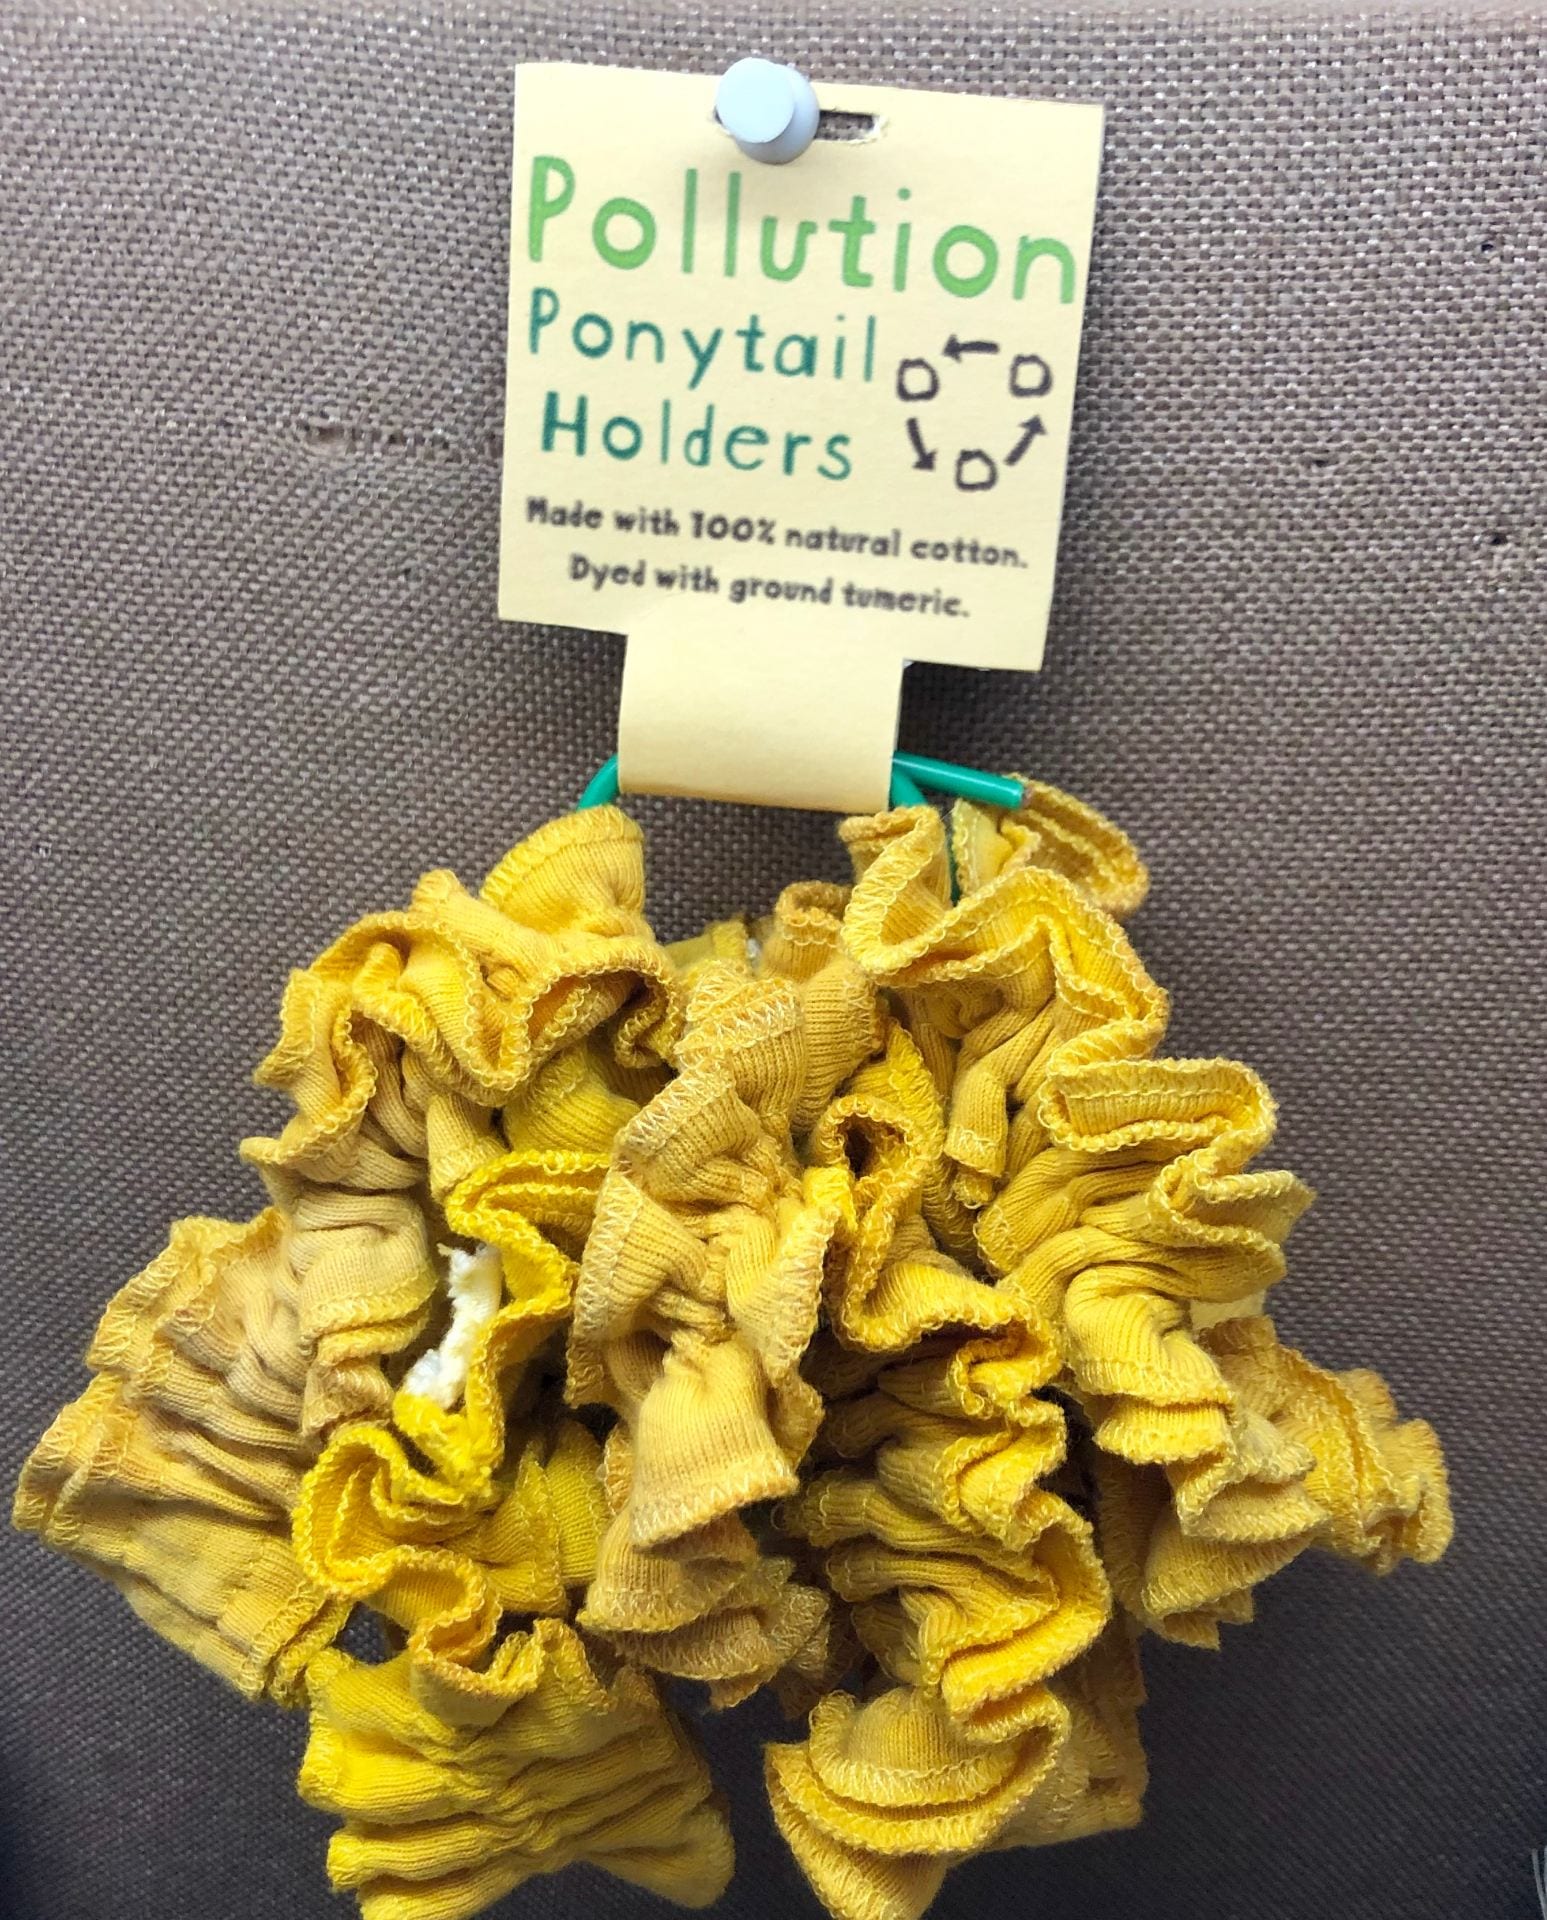 Pollution Ponytail Holders- Water PH Experiment